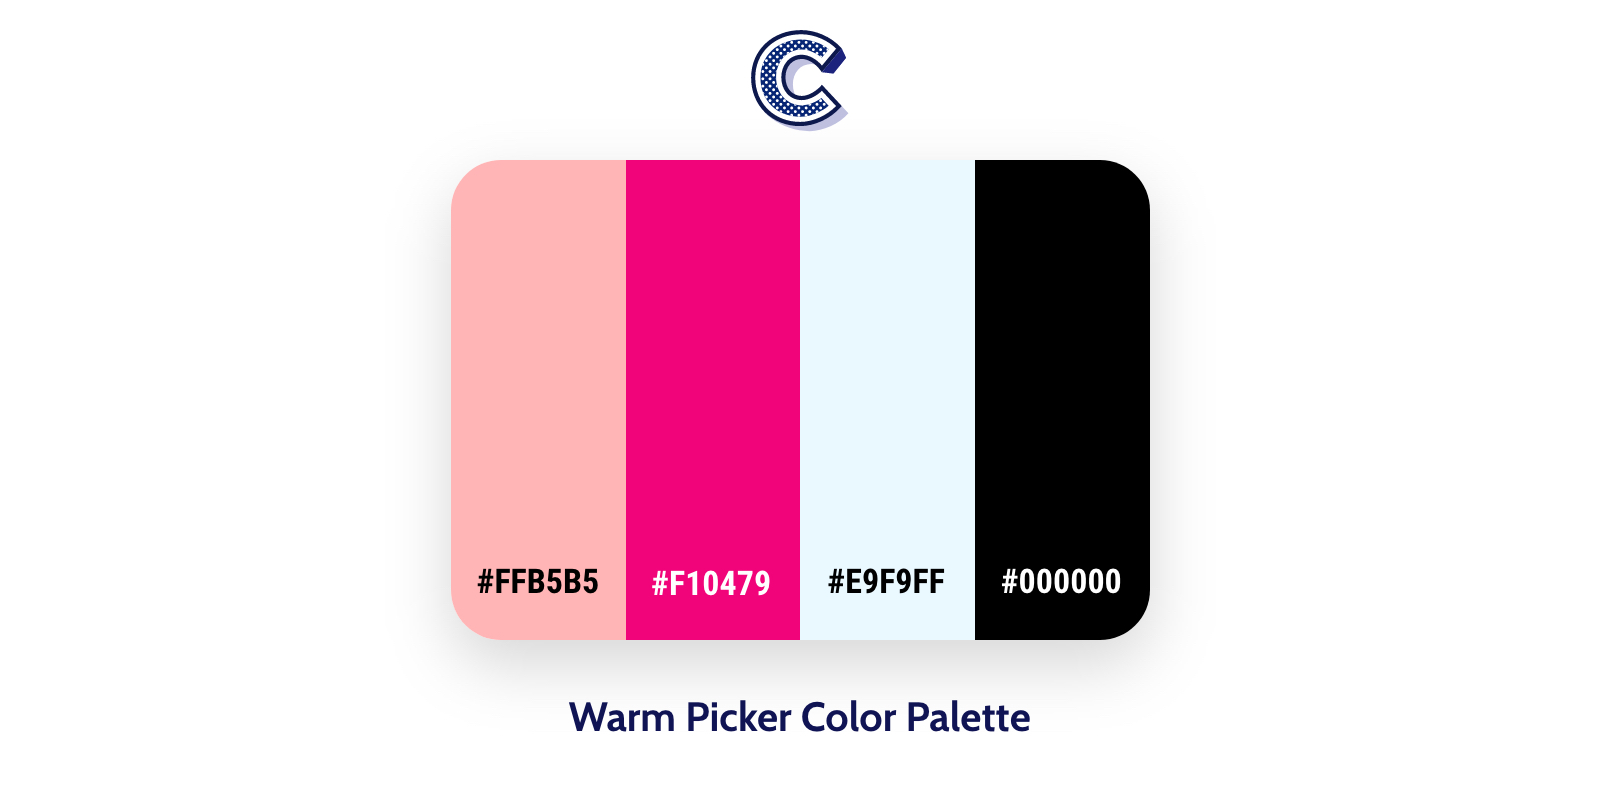 the featured image of warm picker color palette